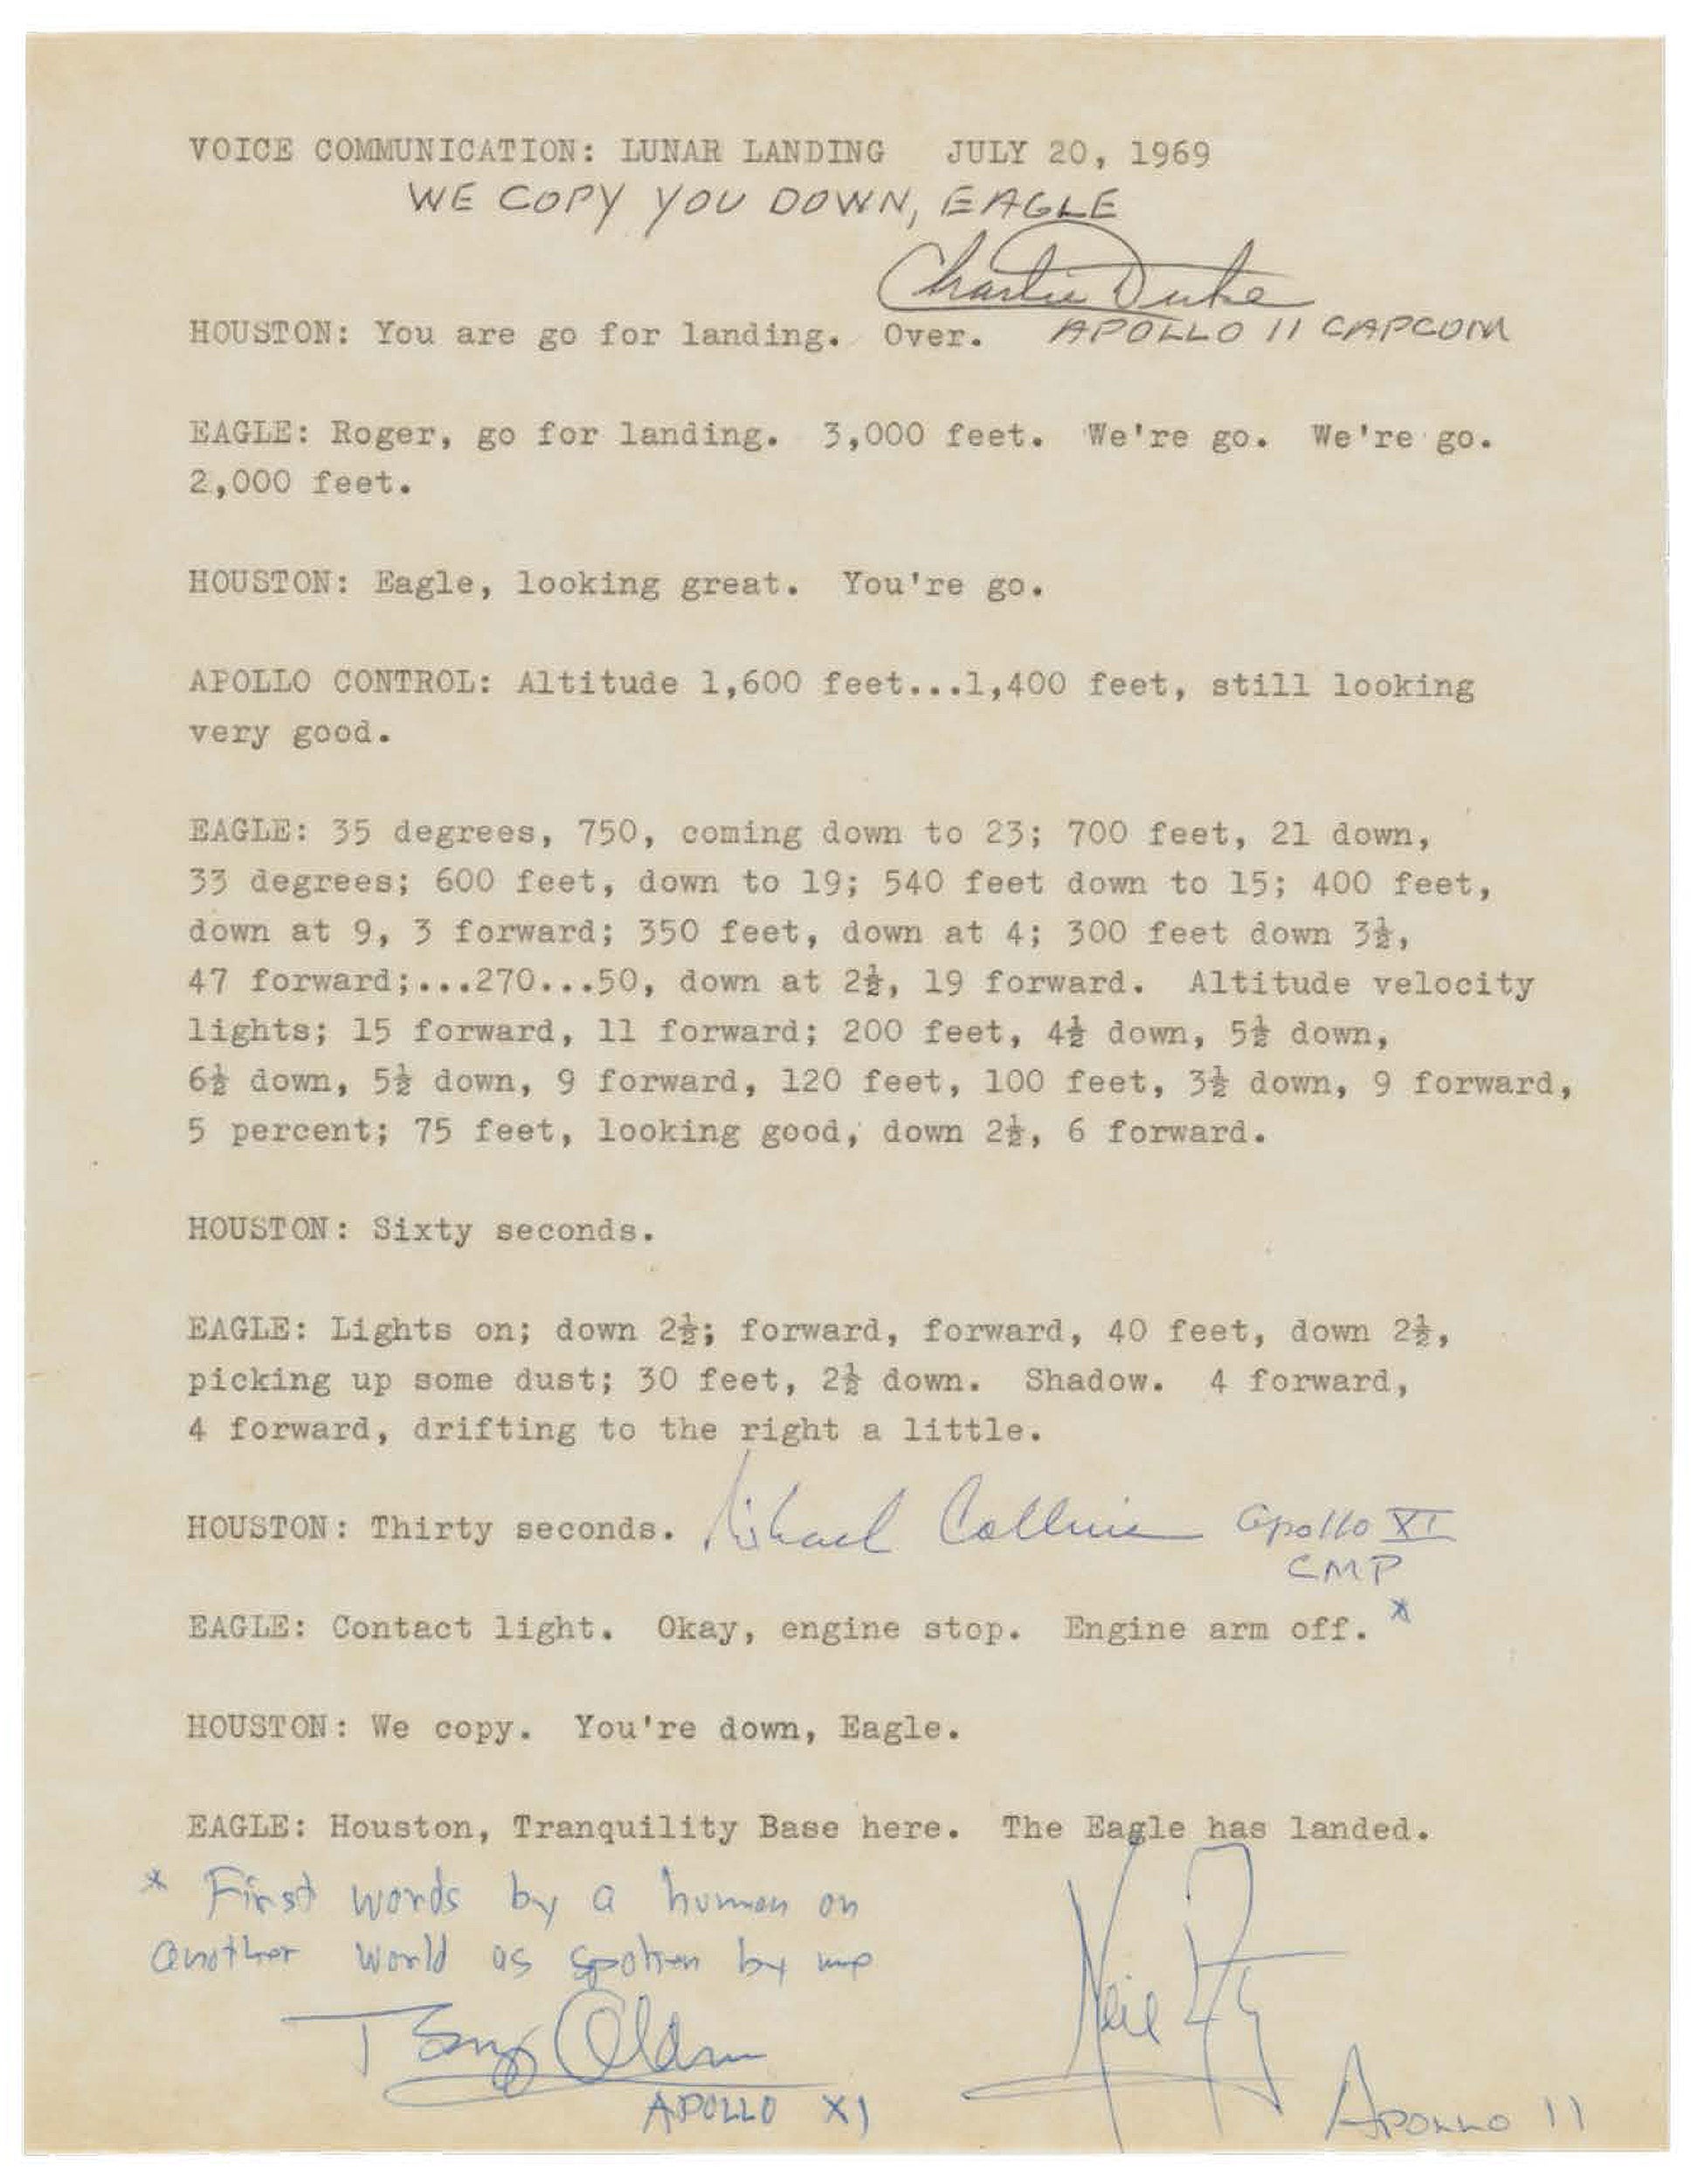 Transcript of Apollo 11 communications, including "The Eagle has landed."